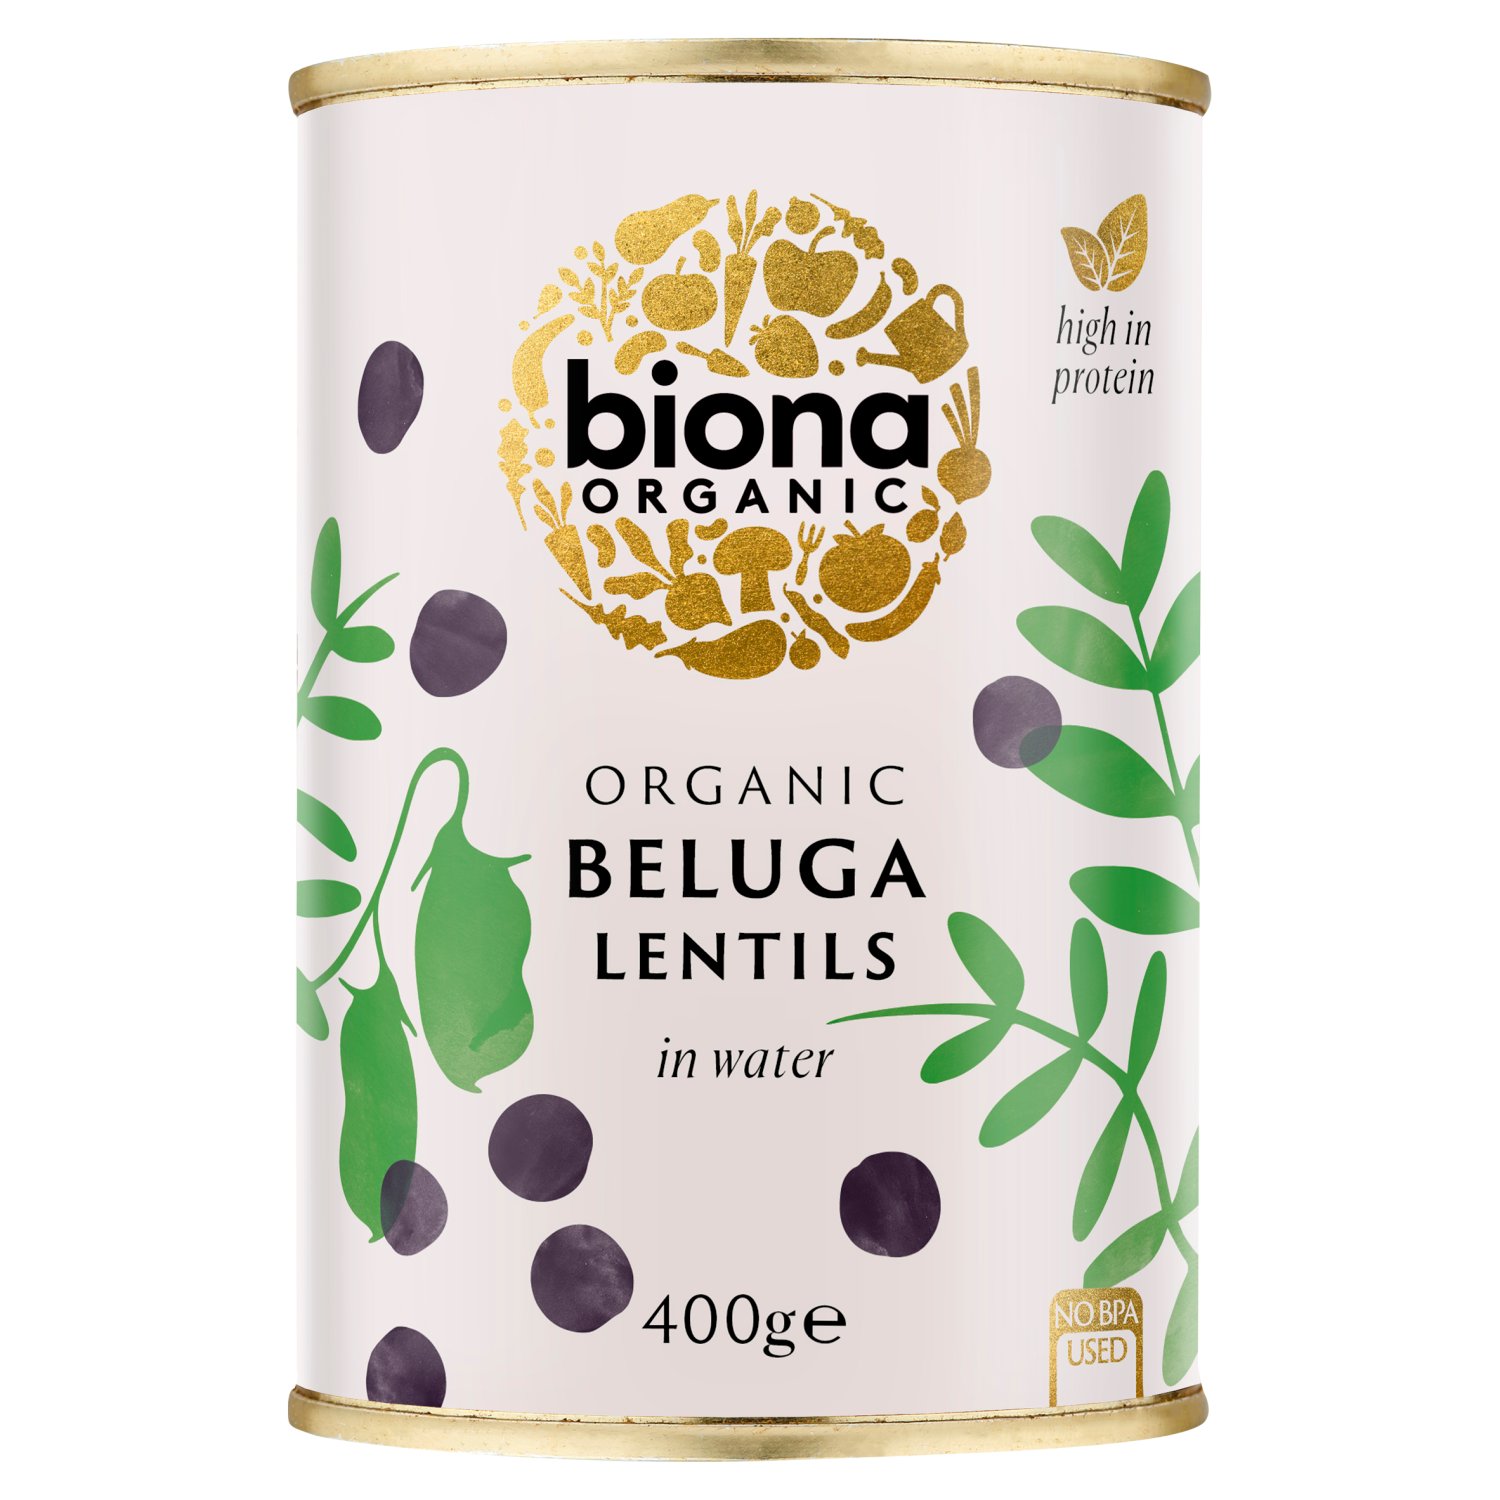 Biona Organic Beluga Lentils are fat free and high in fibre. Firm texture and delicious flavour, perfect for salads, stews or soups.